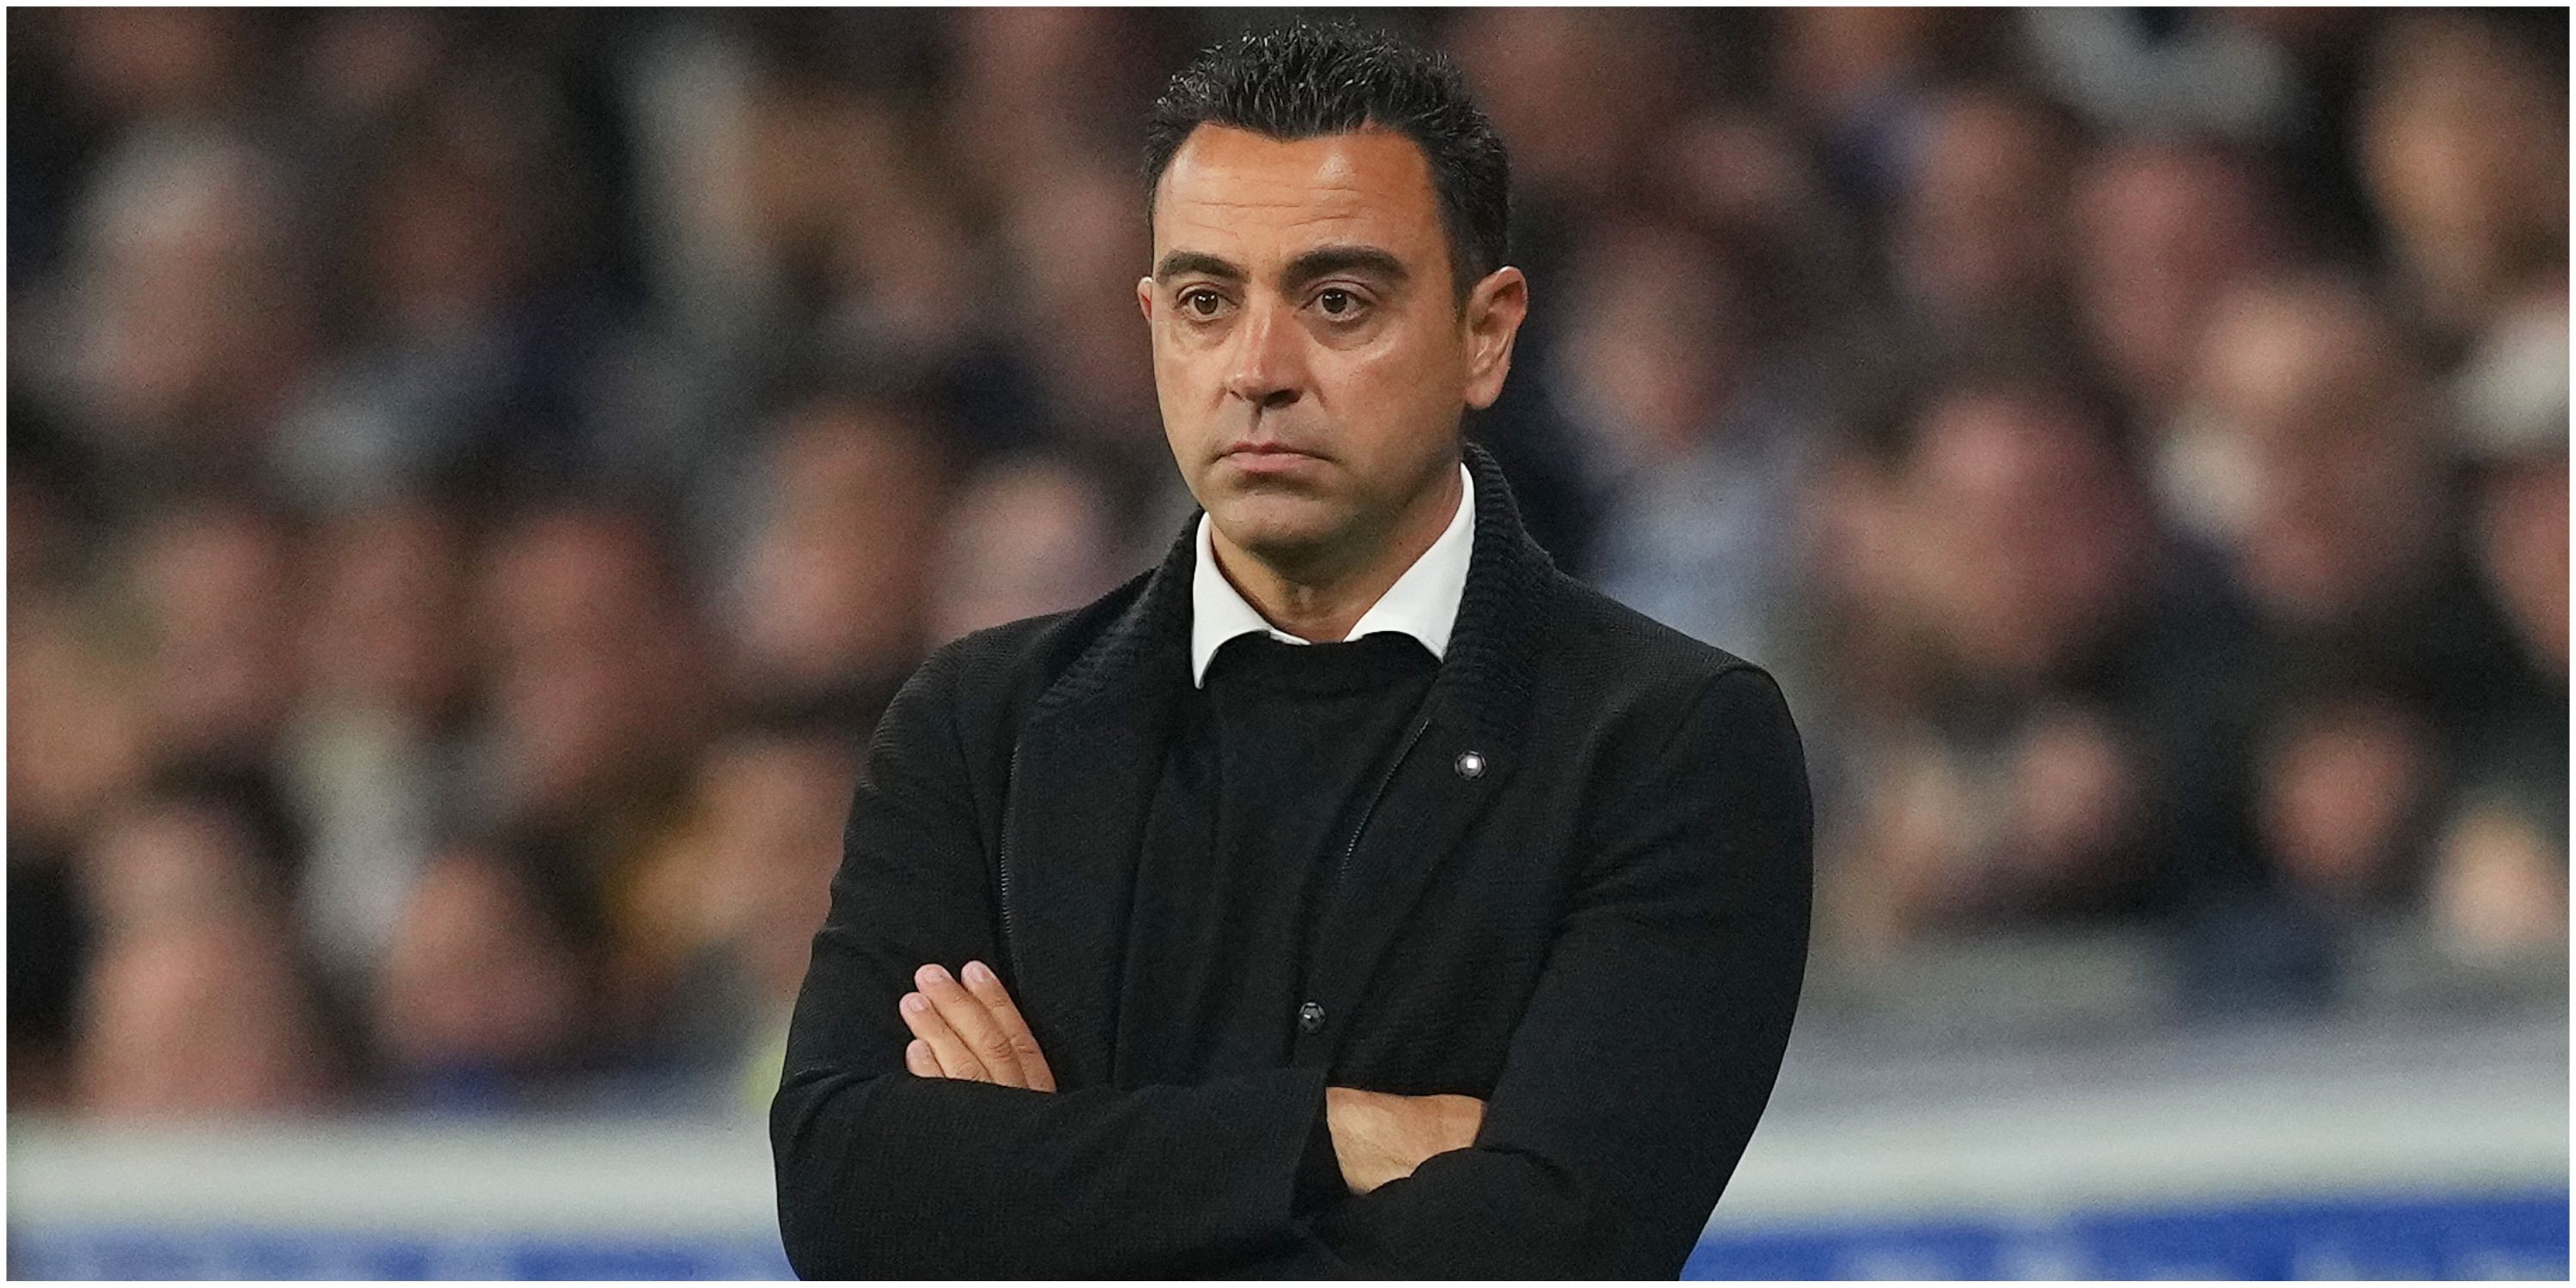 Xavi imposed 10 clear rules for Barcelona players after becoming manager